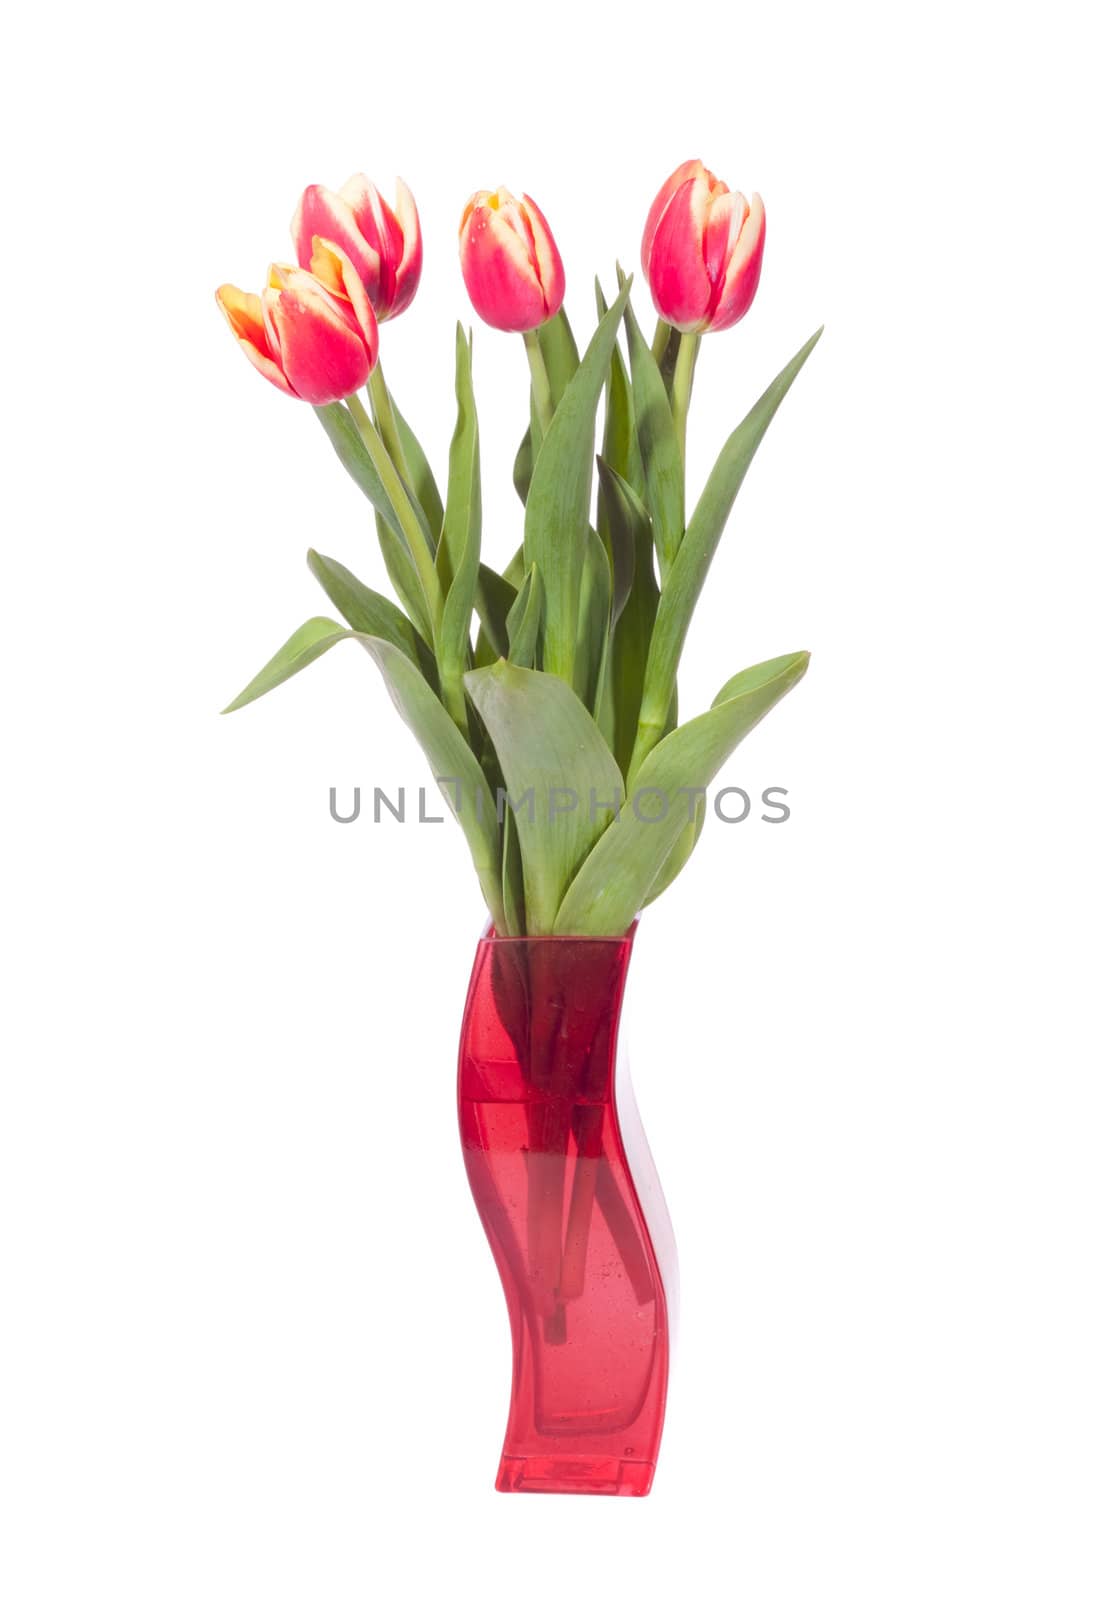 bouquet of fresh tulips by aguirre_mar